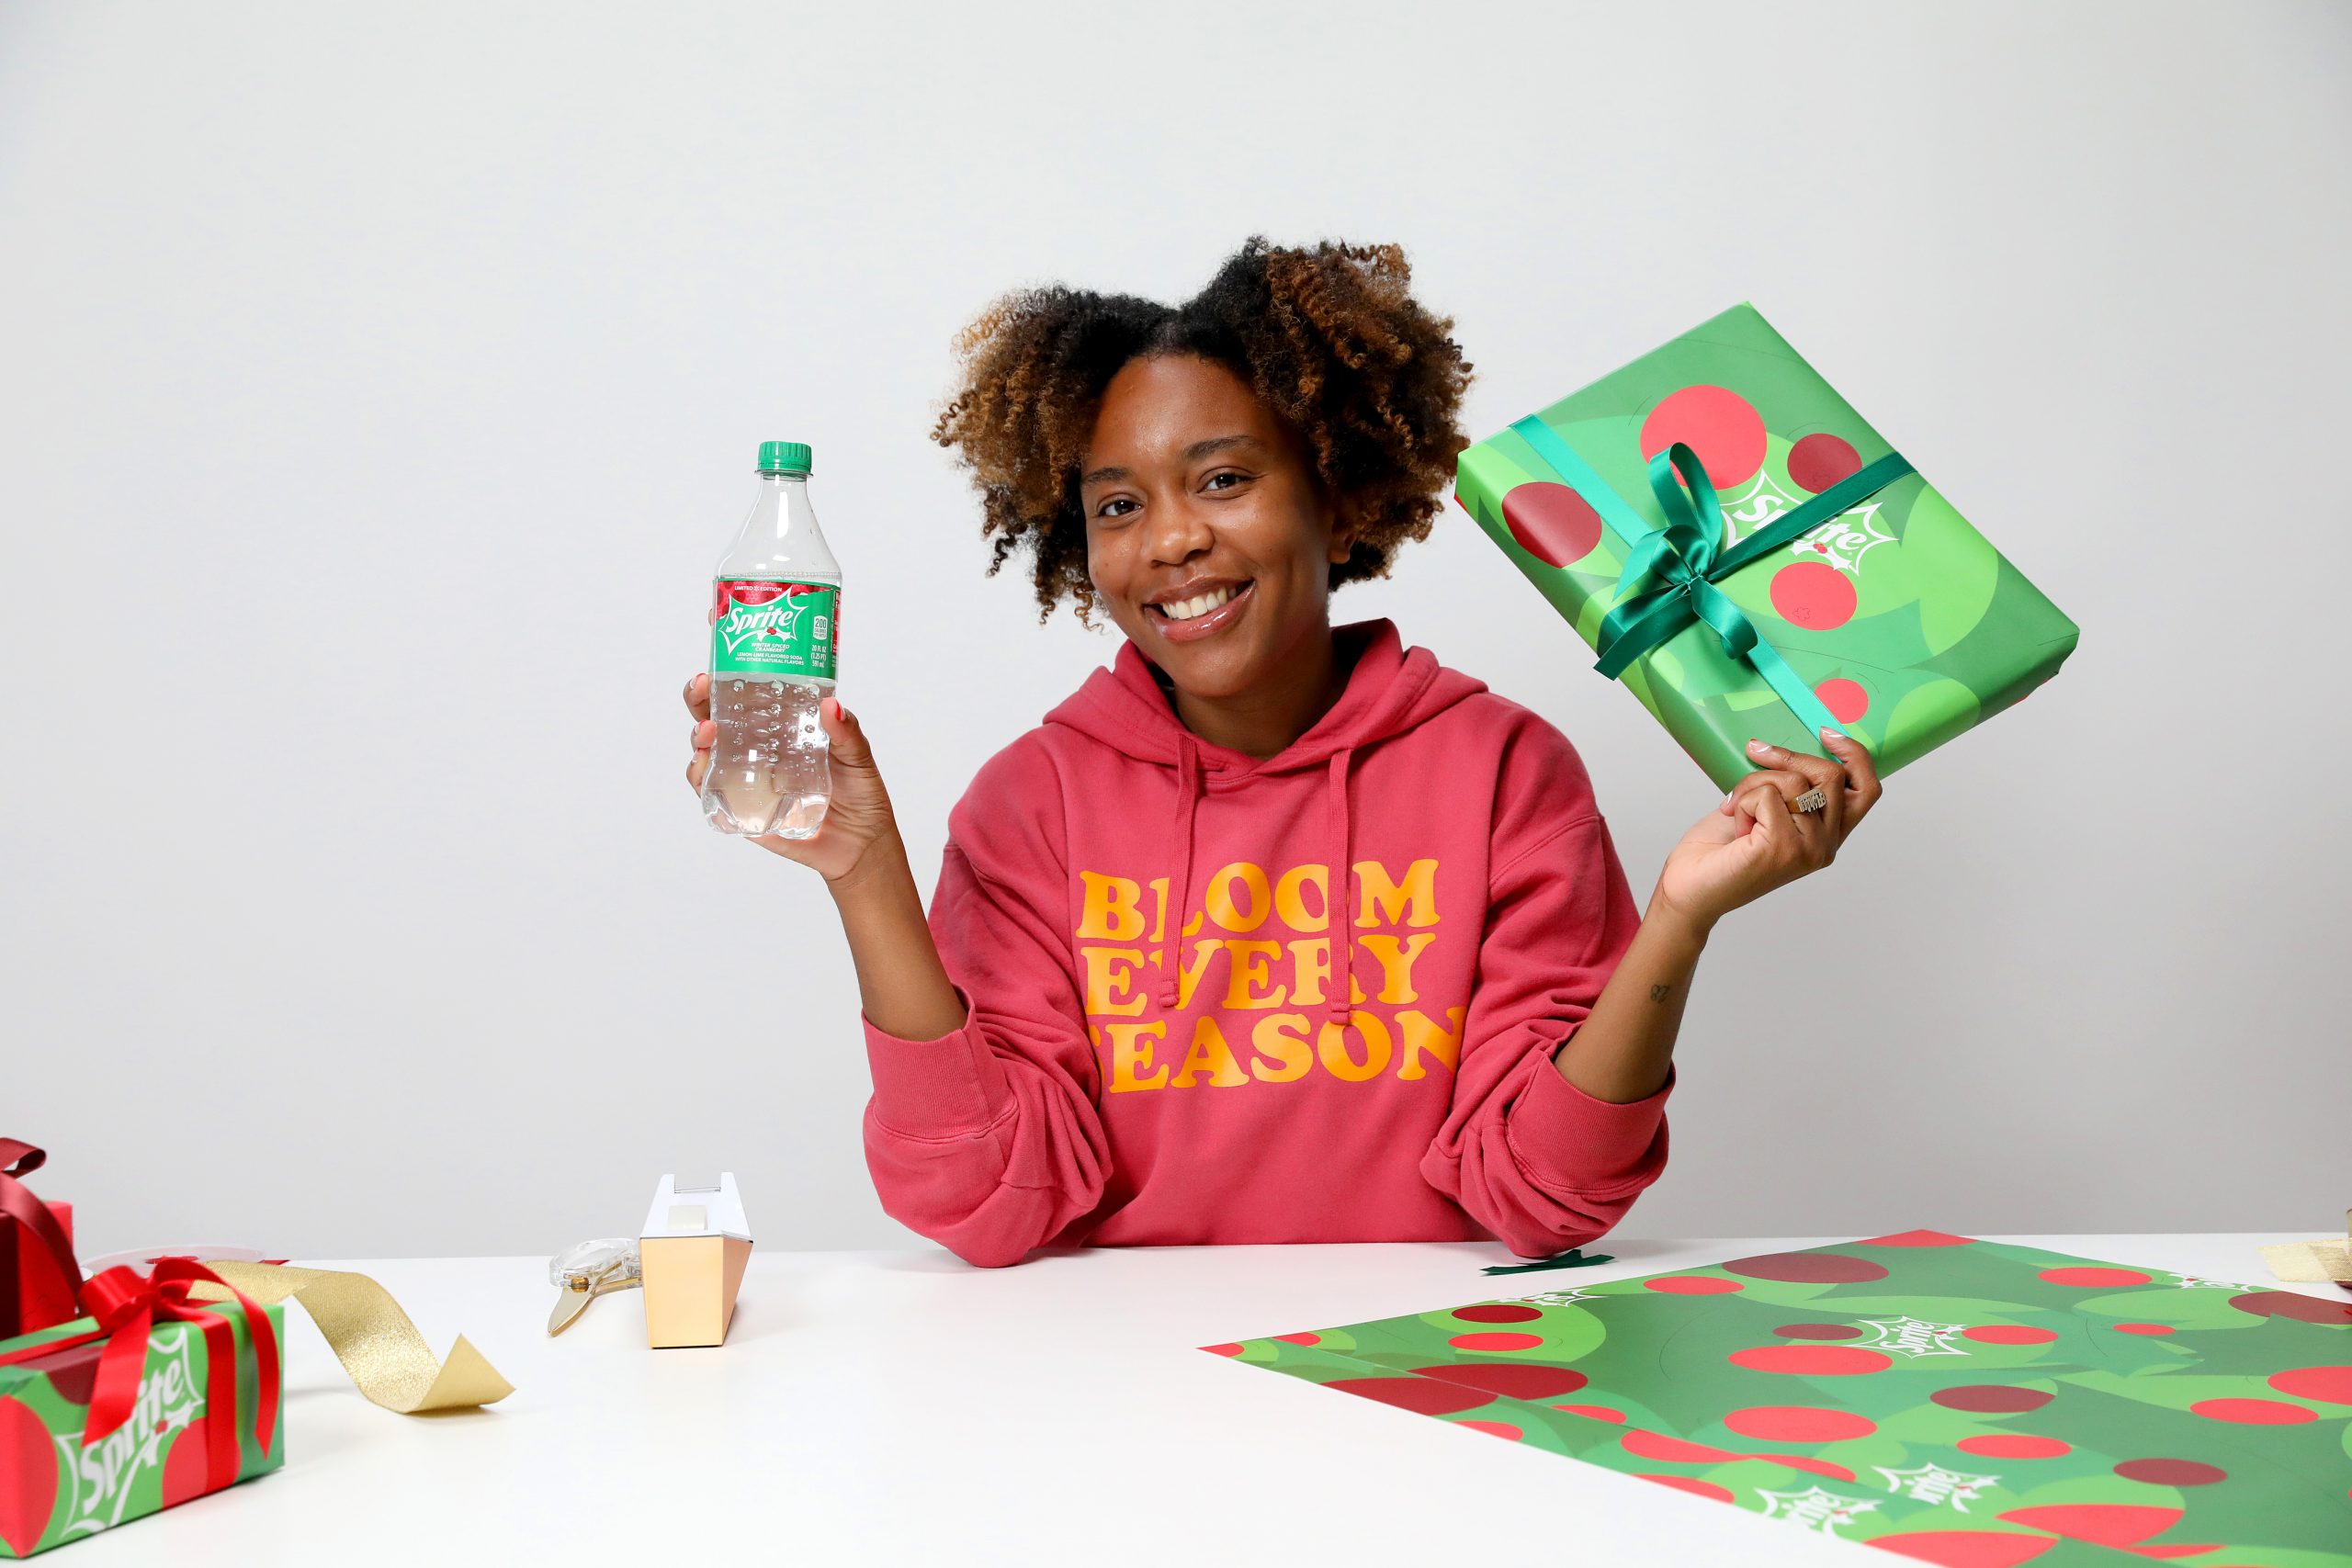 JERSEY CITY, NEW JERSEY - SEPTEMBER 28: Sprite Spreads Holiday Cheer With New LTO Flavor and Custom Gift Wrap Paper on September 28, 2021 in Jersey City, New Jersey. (Photo by Monica Schipper/Getty Images for Sprite)